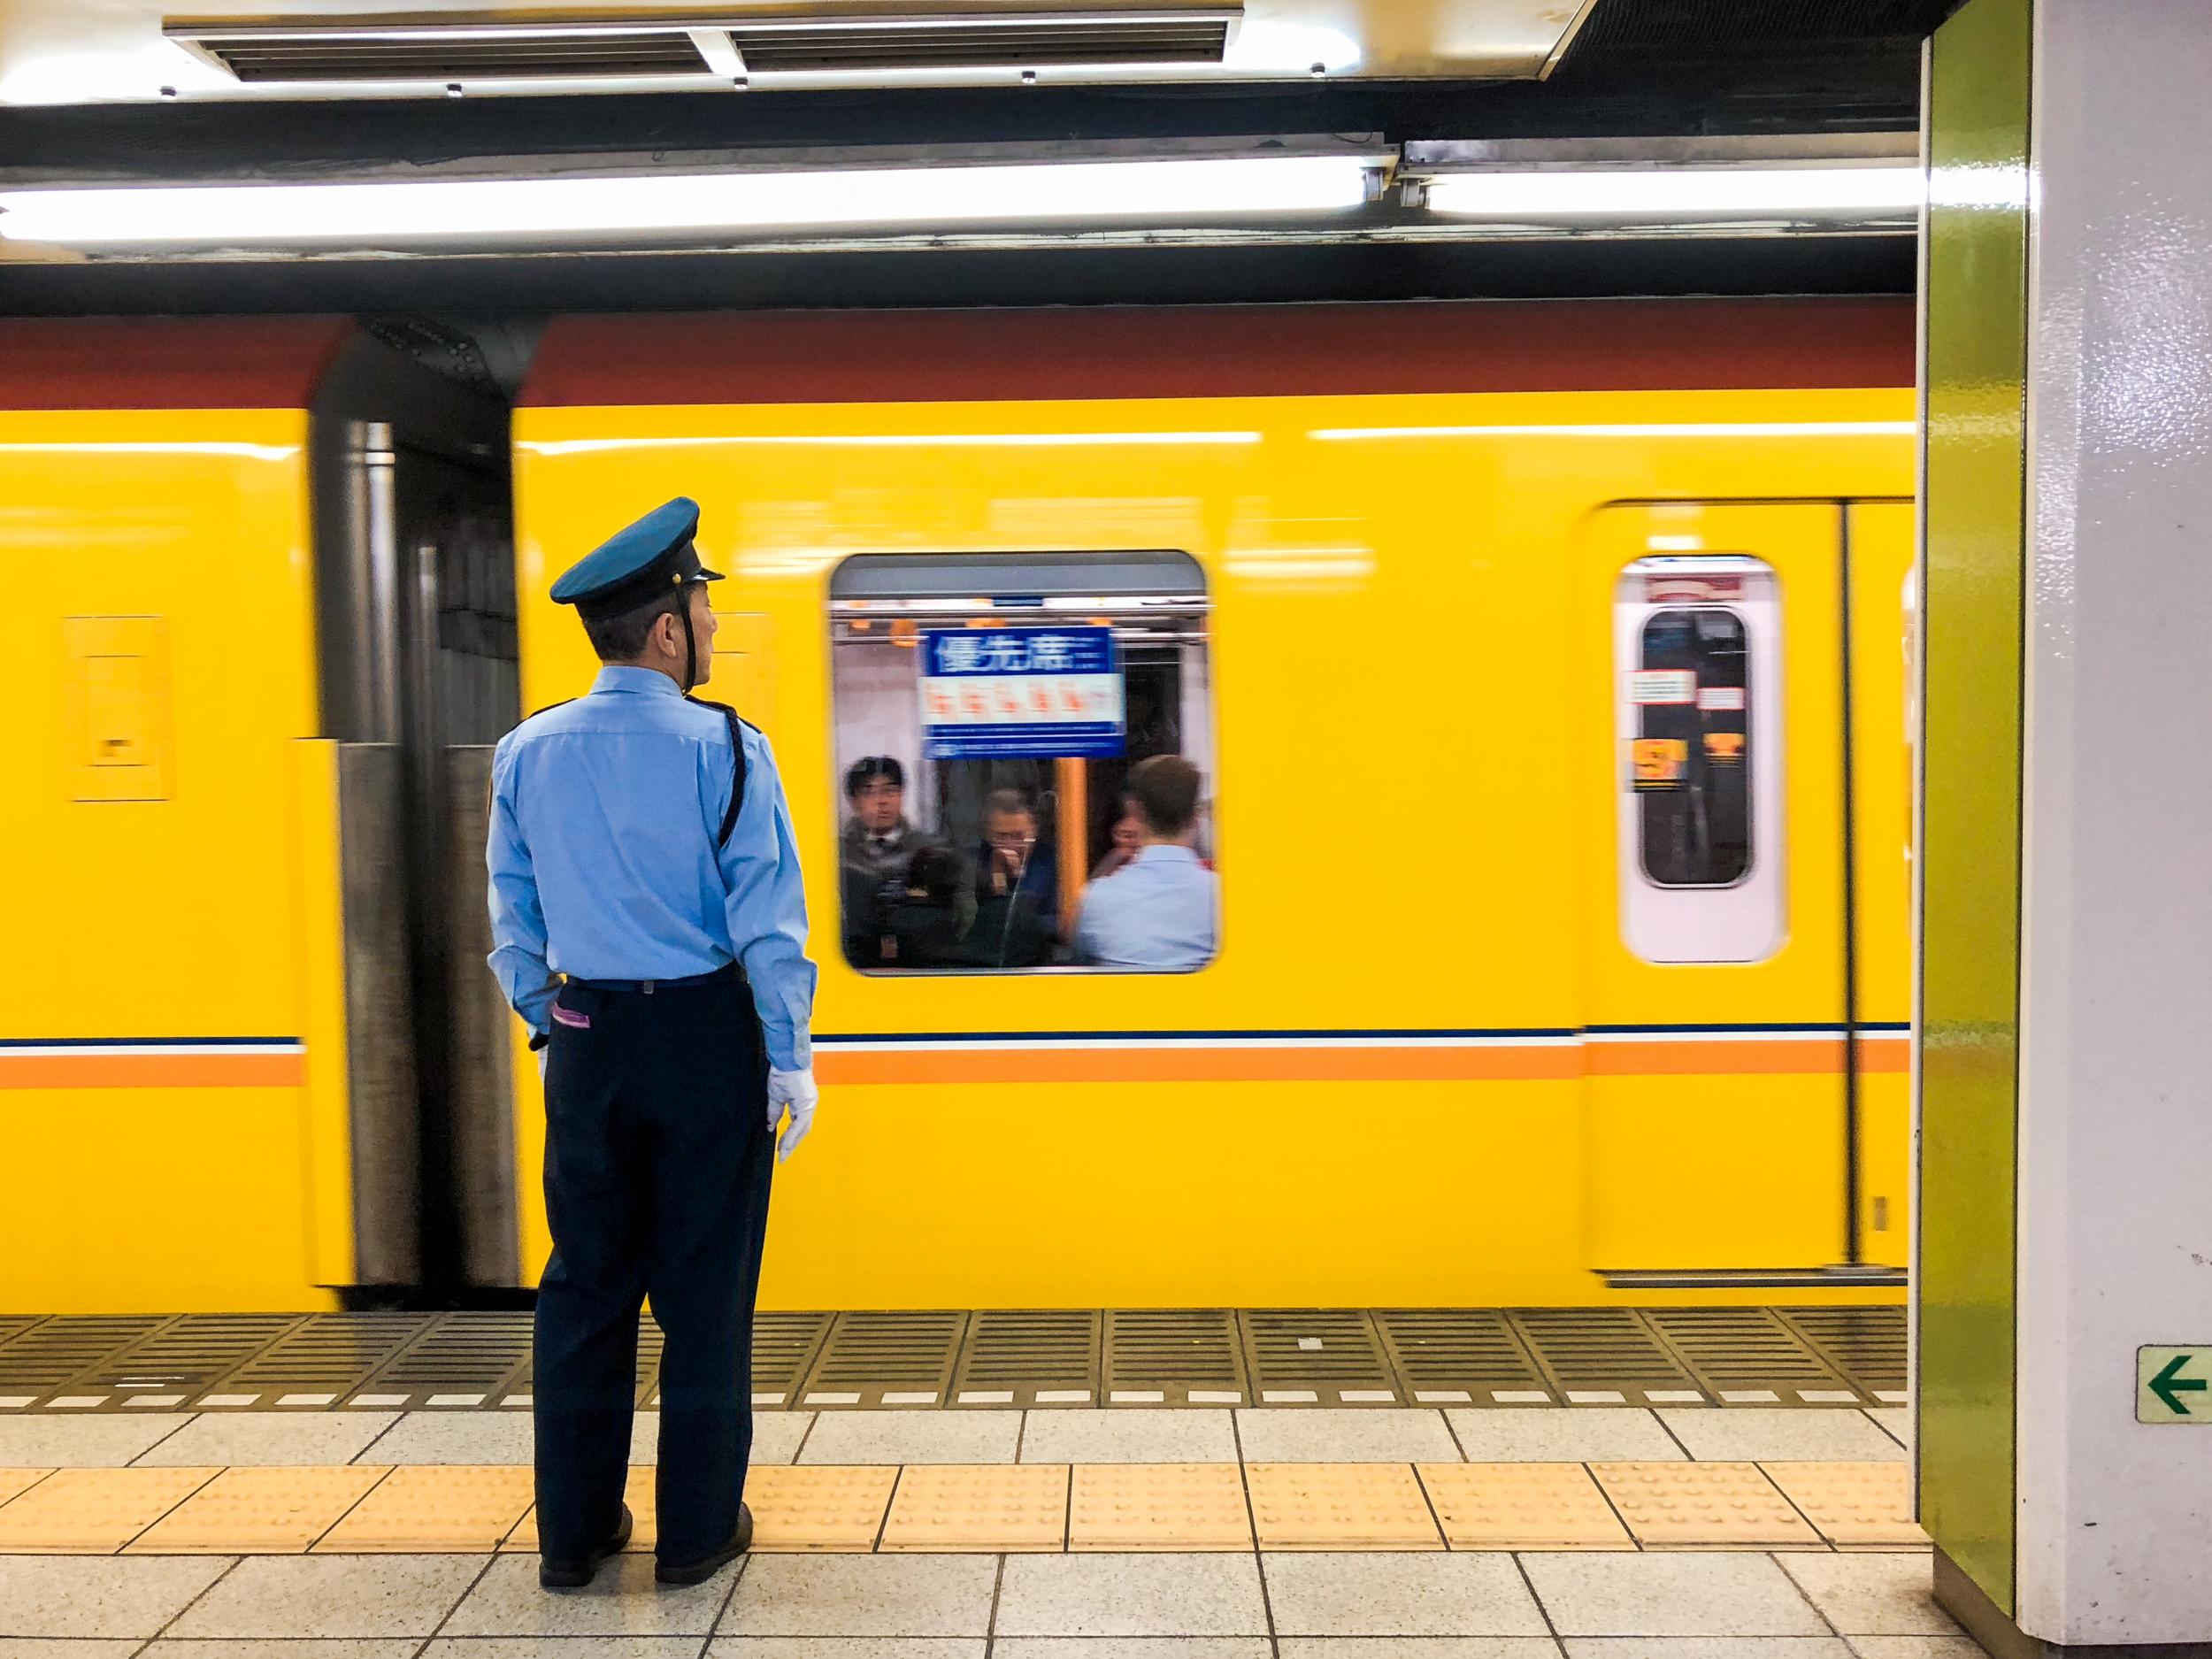 One Tokyo metro line is offering commuters free soba noodles if they take an earlier train to work